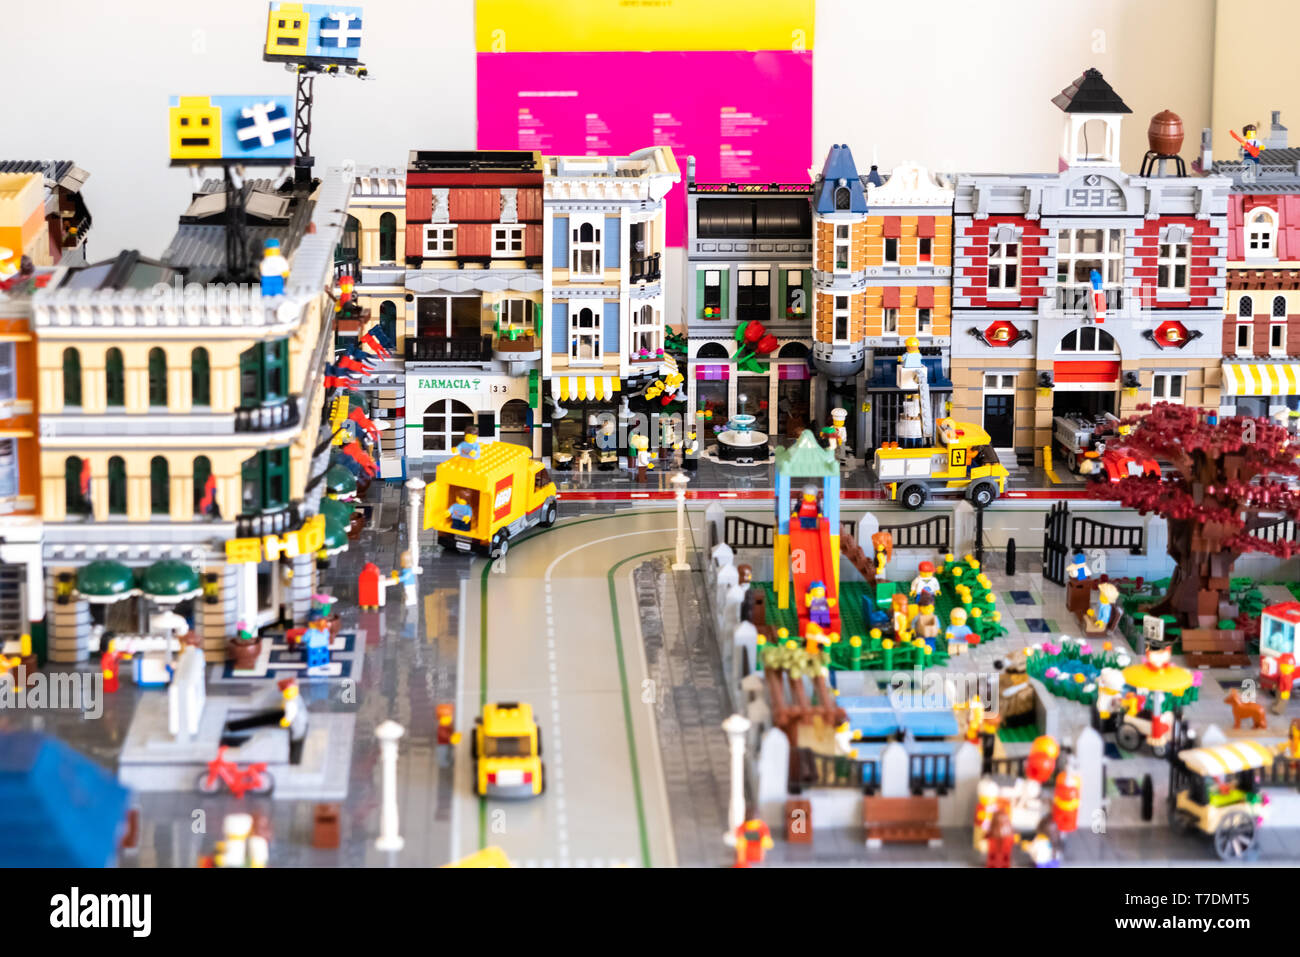 Valencia, Spain - April 13, 2019: Top view of a recreation with Lego  figures of a city with buildings and streets Stock Photo - Alamy